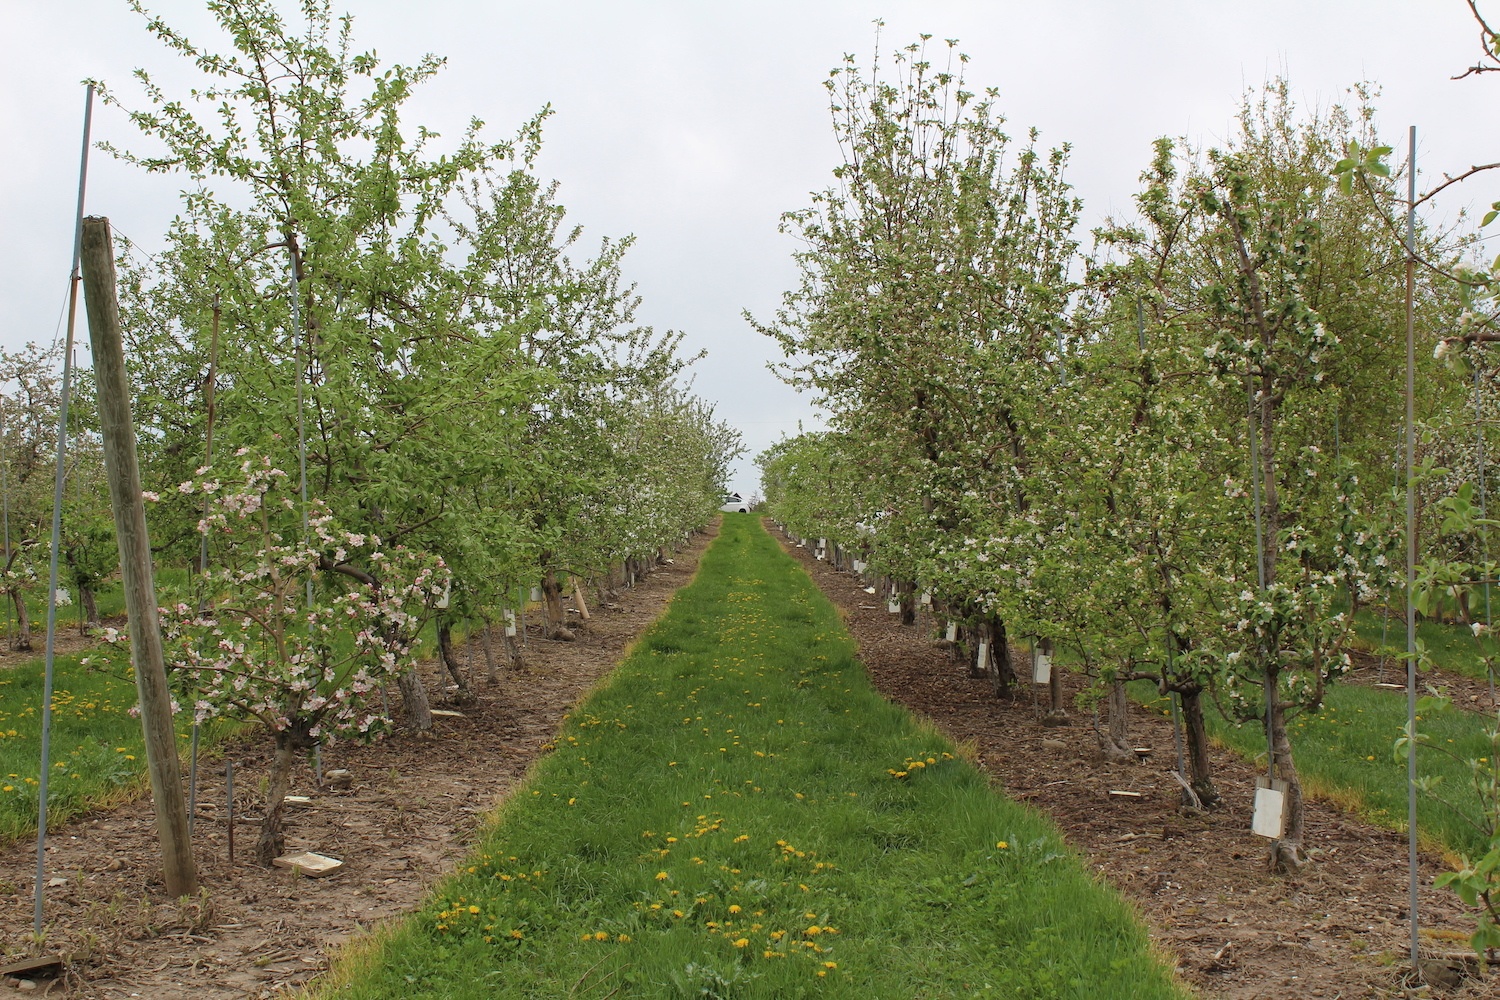 Rows of diverse wild and domesticated apple varieties flower in Khan's experimental orchard in Geneva, New York. More than 200 varieties in the apple genus Malus from all over the world are represented in the orchard. July 2021